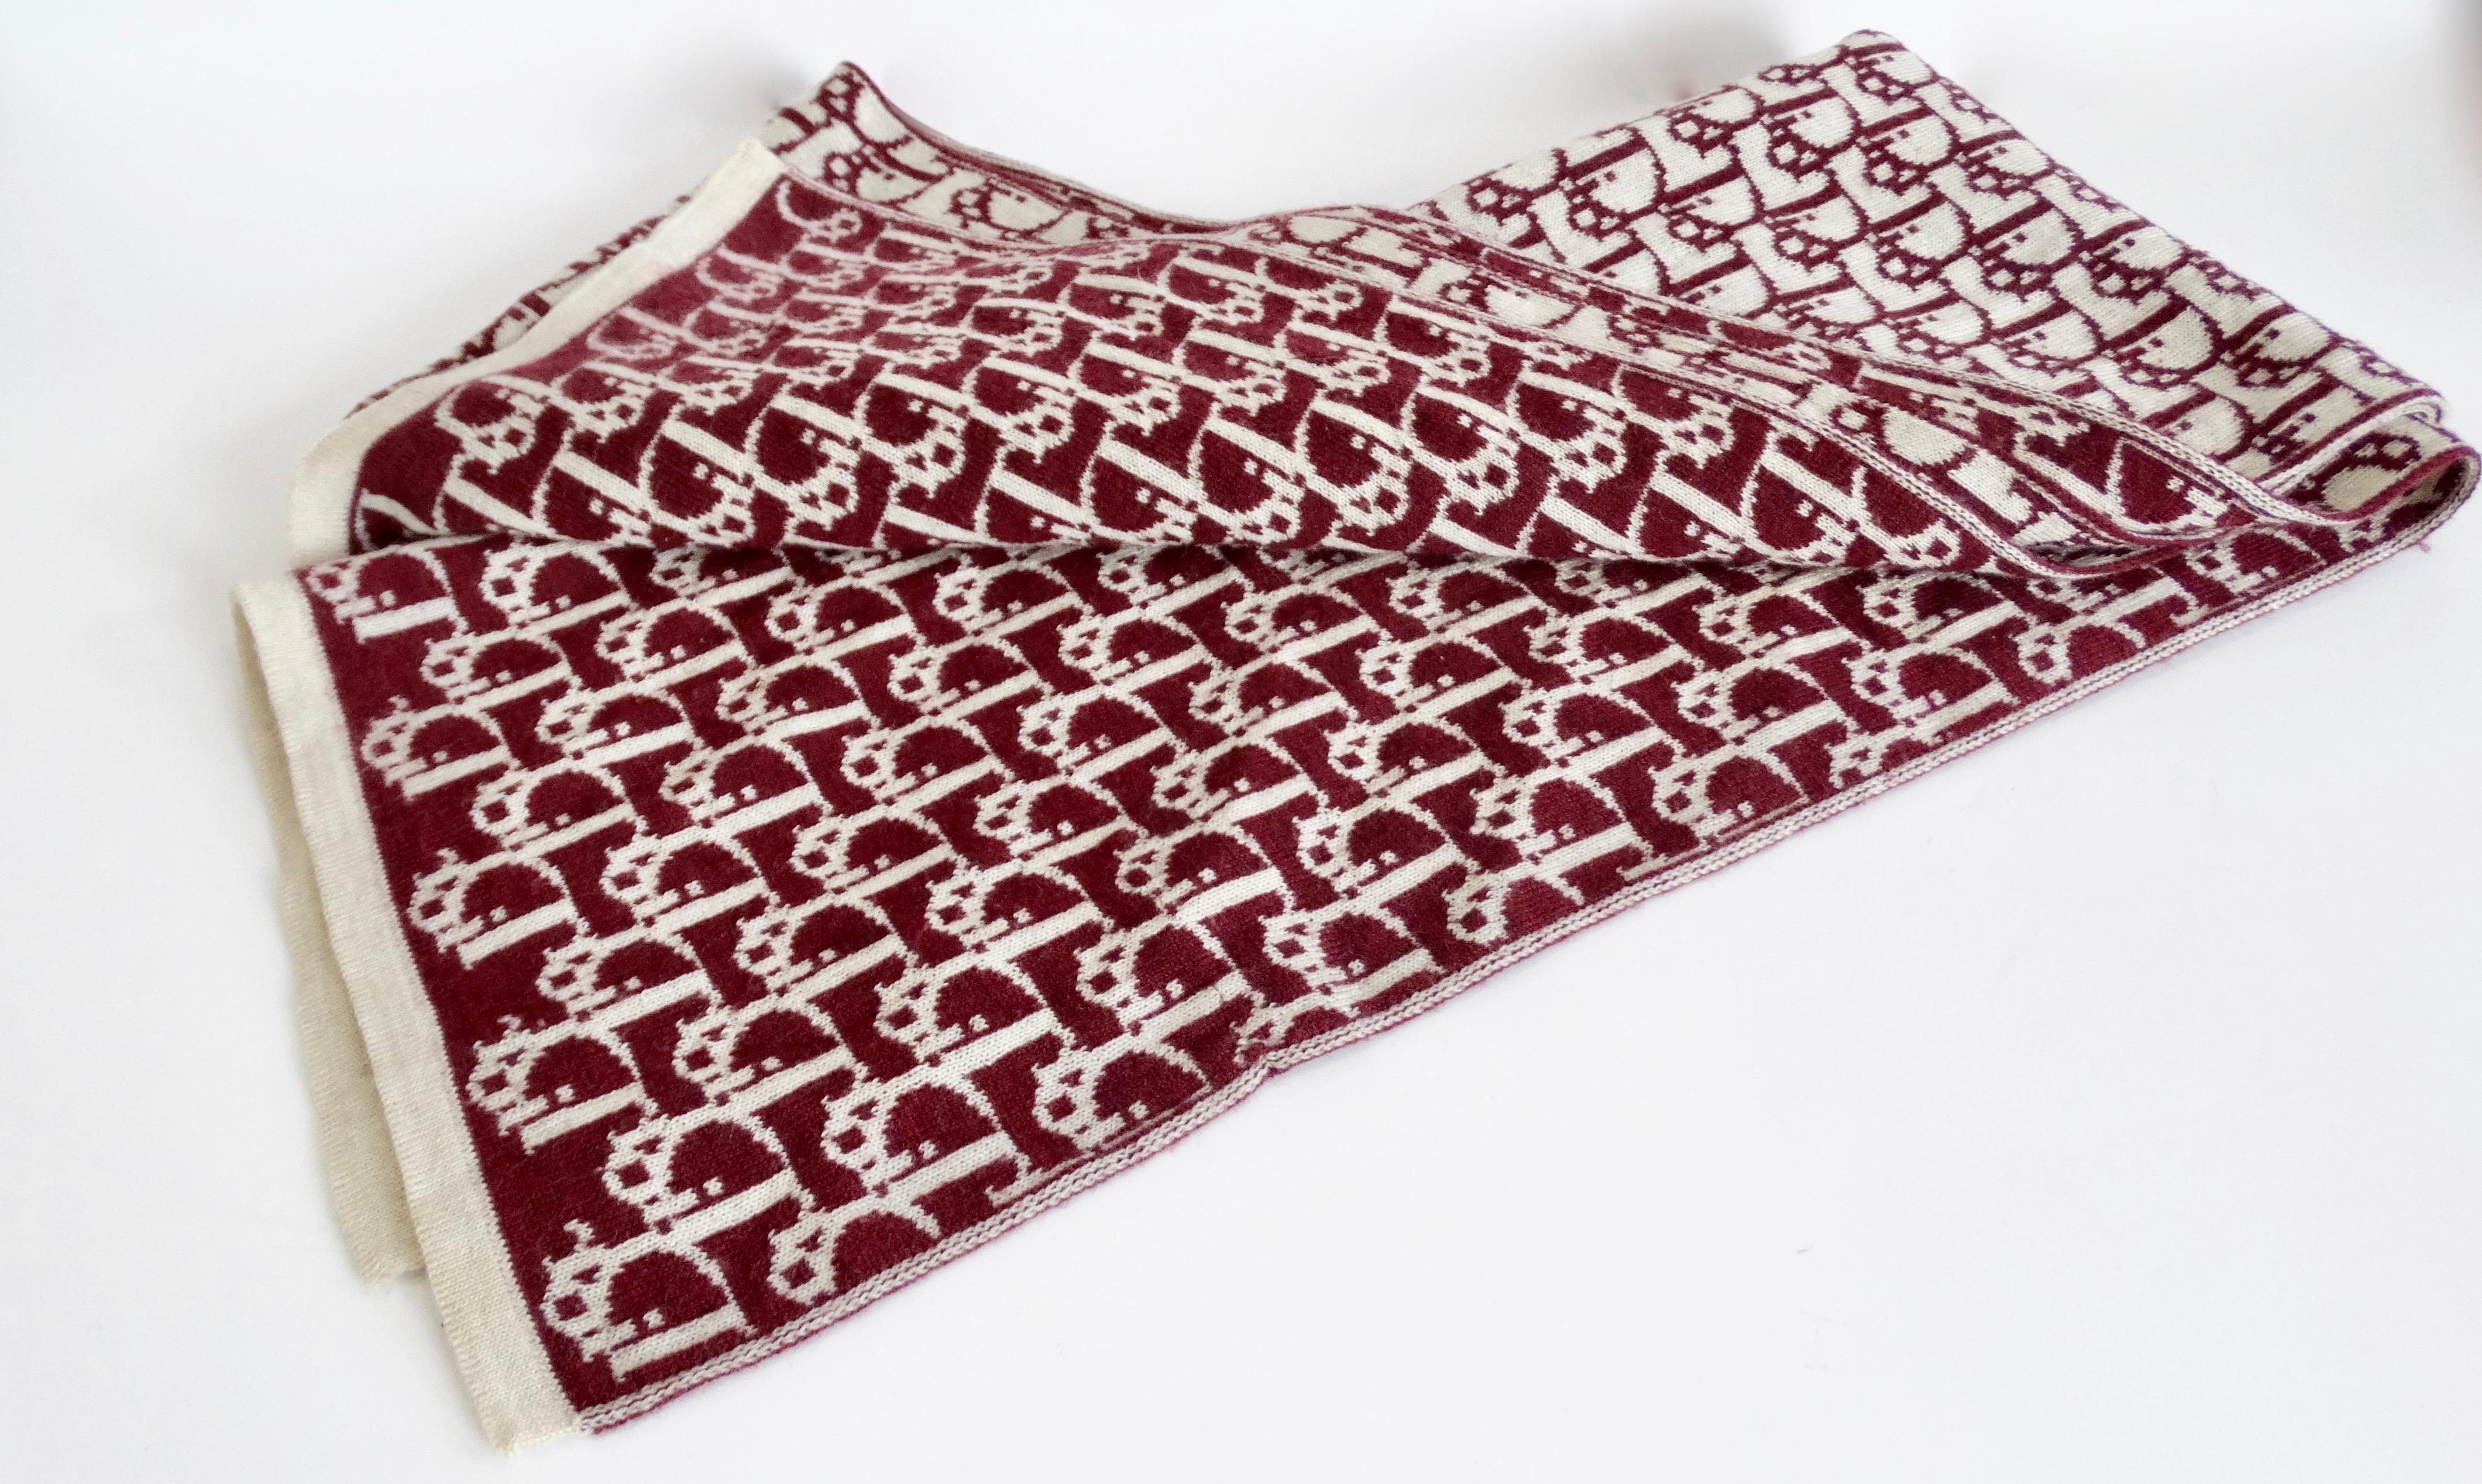 Stay cozy all winter long with this Dior scarf! Circa 1990s, this extra long scarf is made of extra soft wool and features the Dior monogram in maroon letters with a cream background, and vice versa on the back. The perfect scarf to throw on with